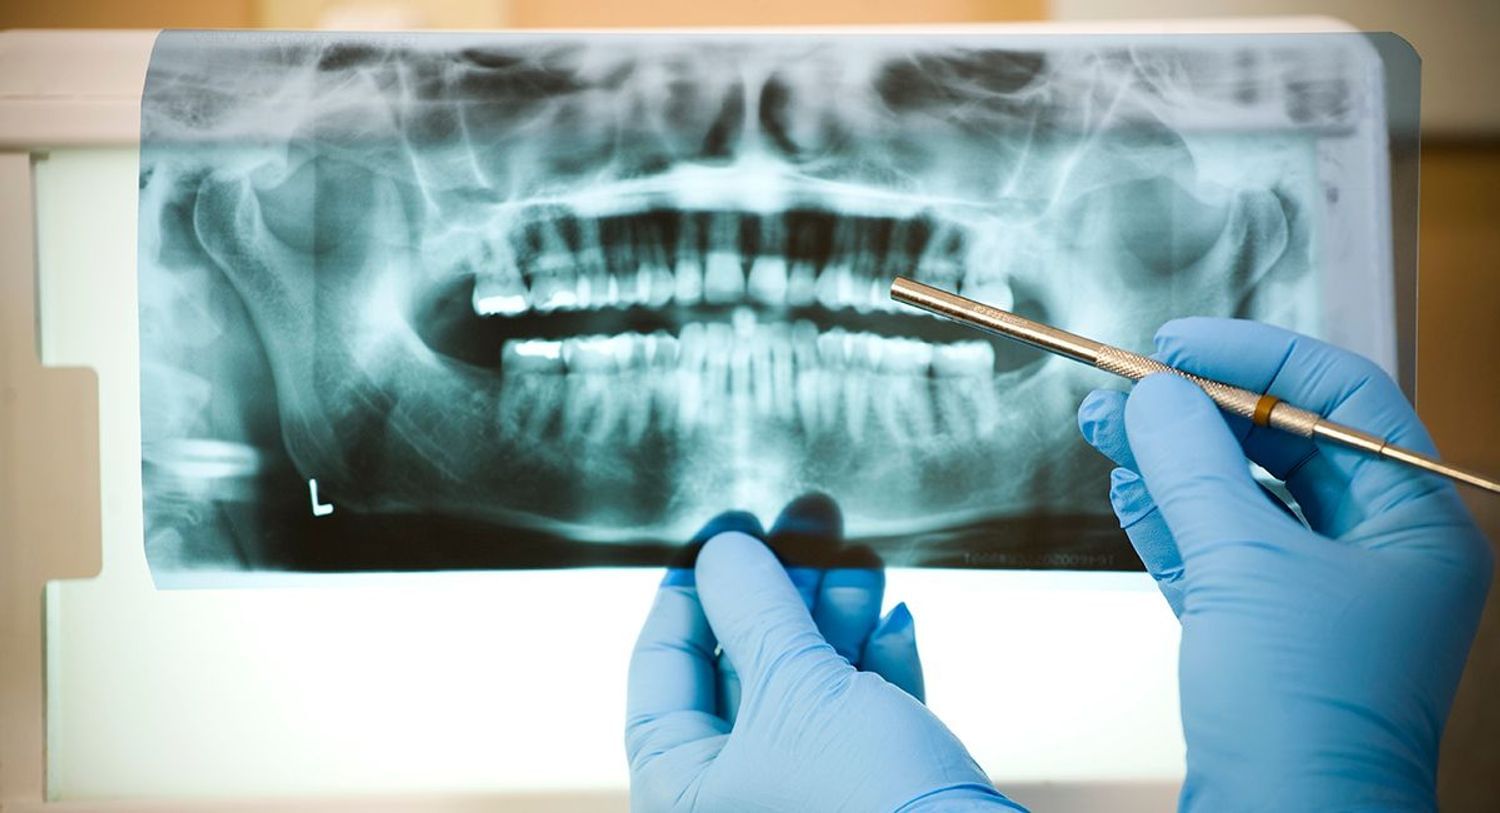 X-ray board being examined by a dentist